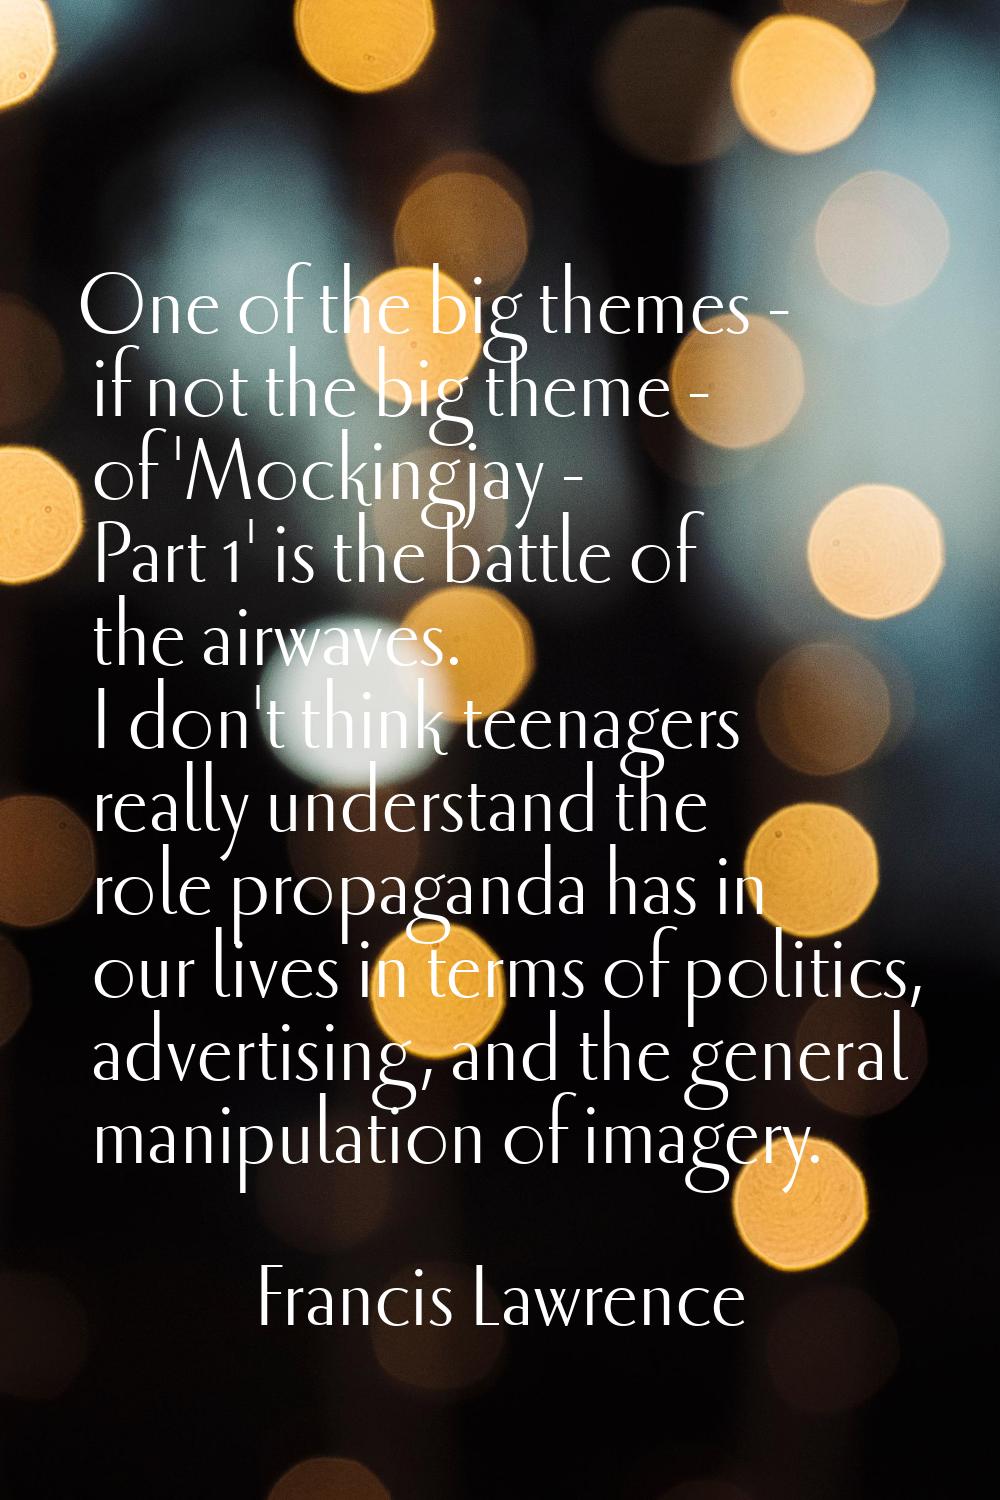 One of the big themes - if not the big theme - of 'Mockingjay - Part 1' is the battle of the airwav